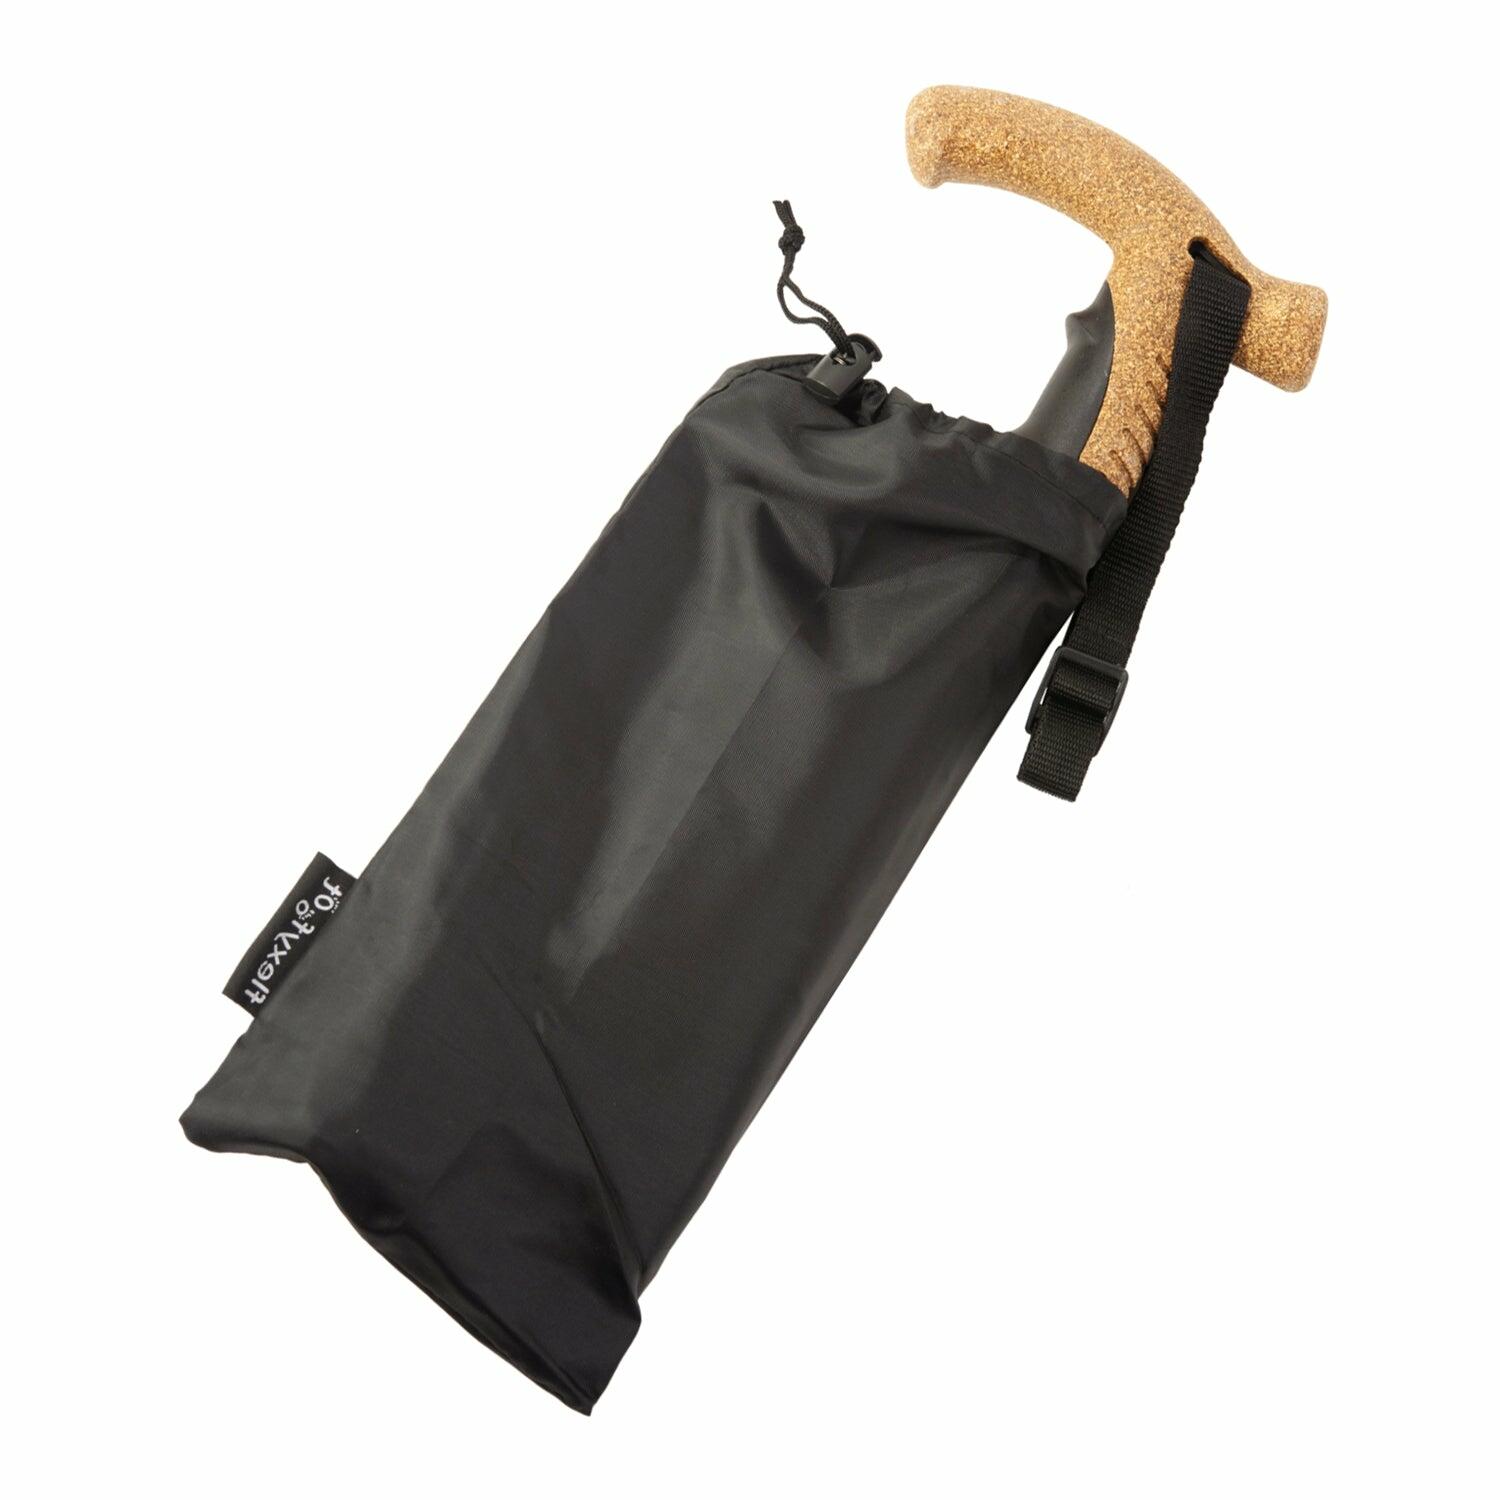 A single blue Flexyfoot Premium Cork Handle Folding Walking Stick in the supplied carry bag